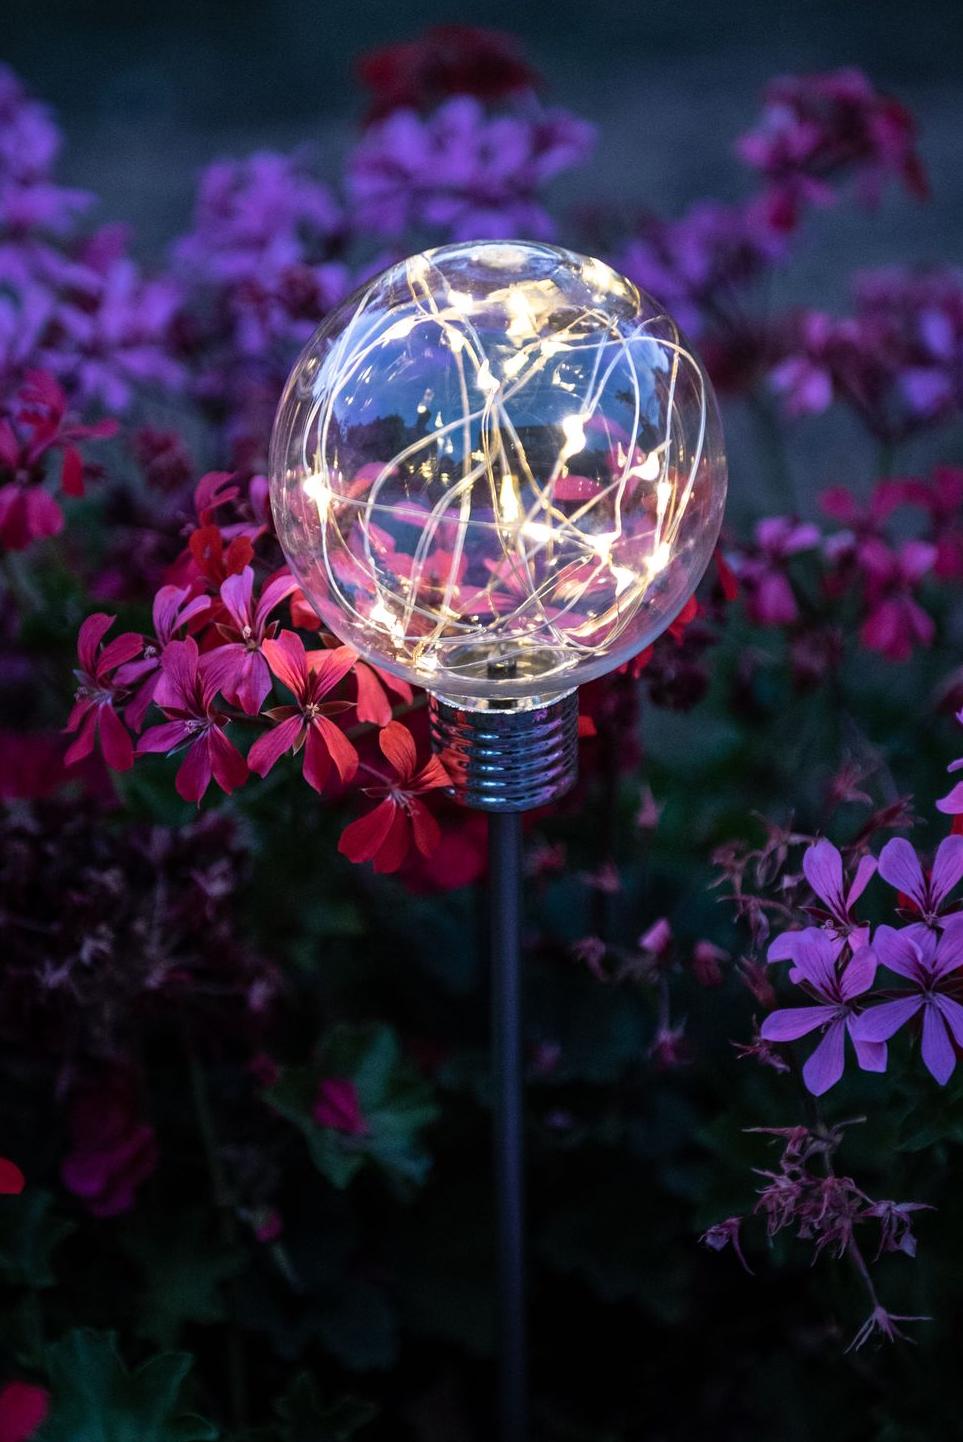 Decorative solar lamp on a pole with a ball containing a filament with small lamps Garden ID